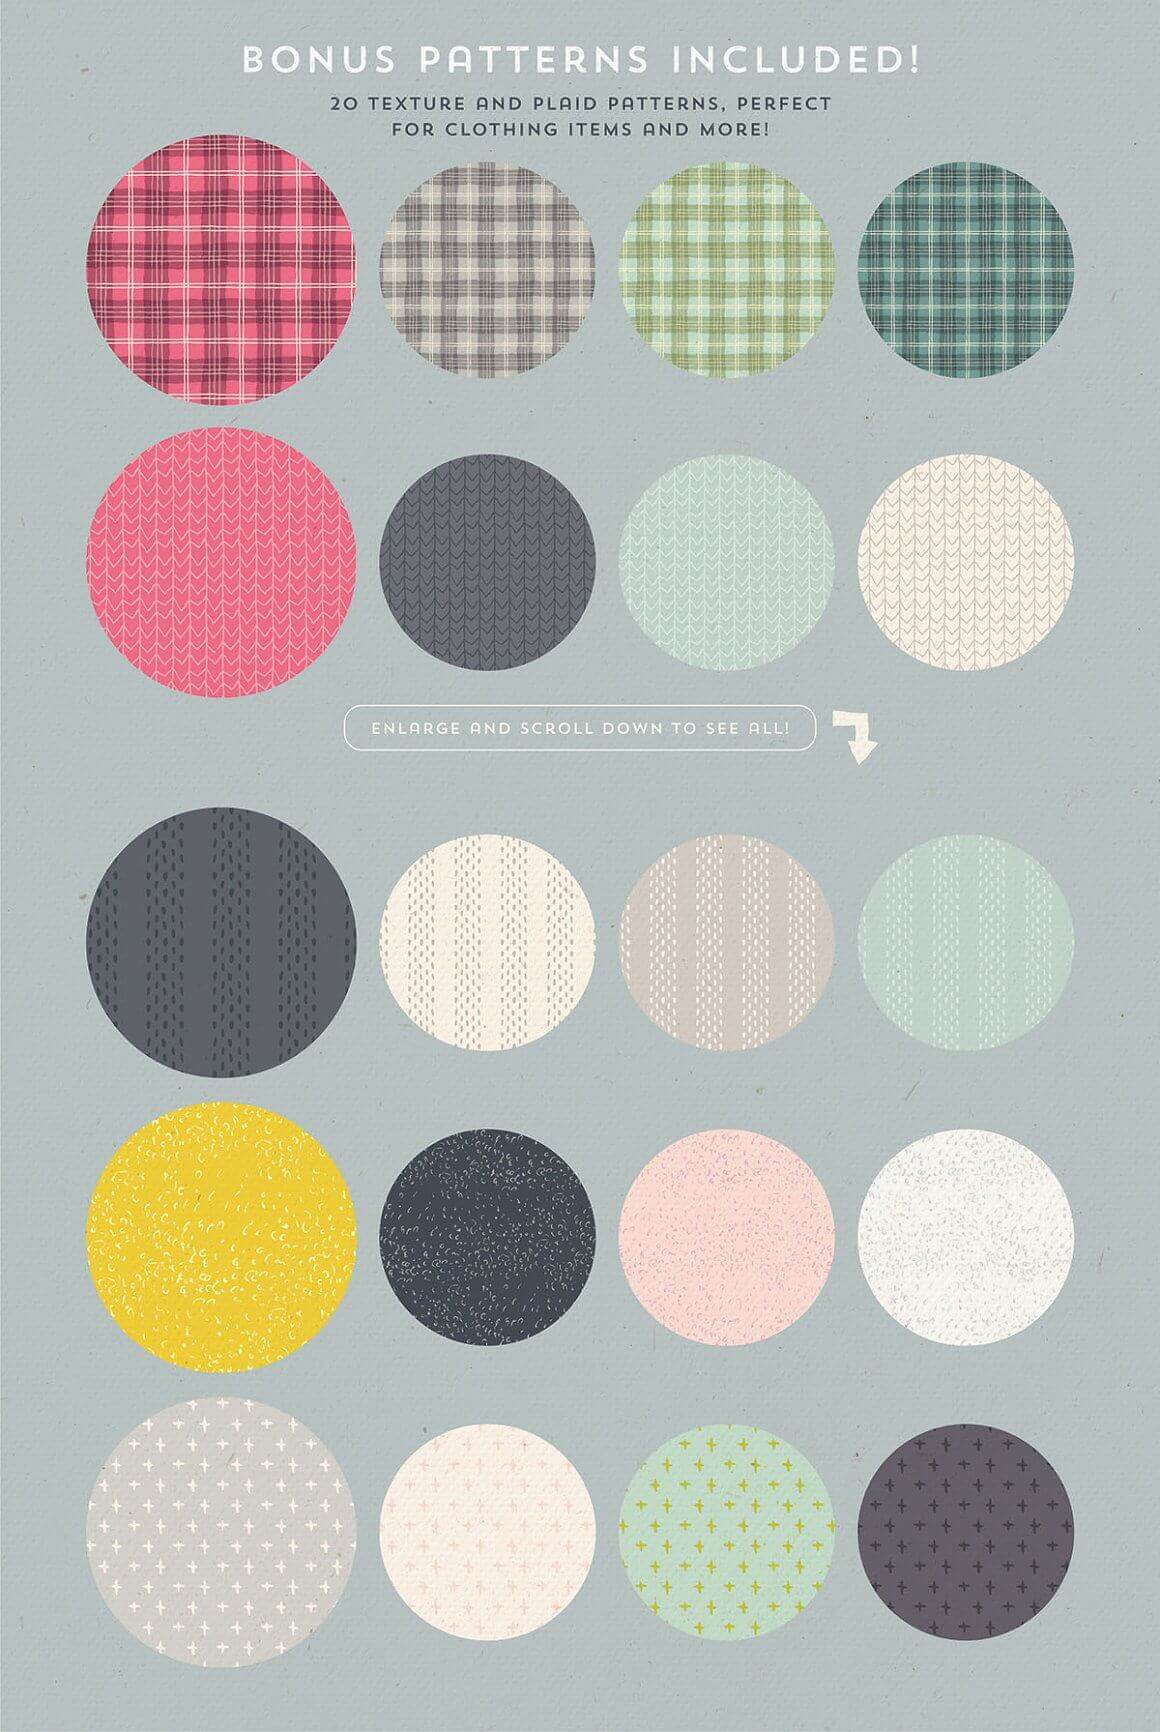 20 texture and plaid patterns, perfect for clothing items and more.